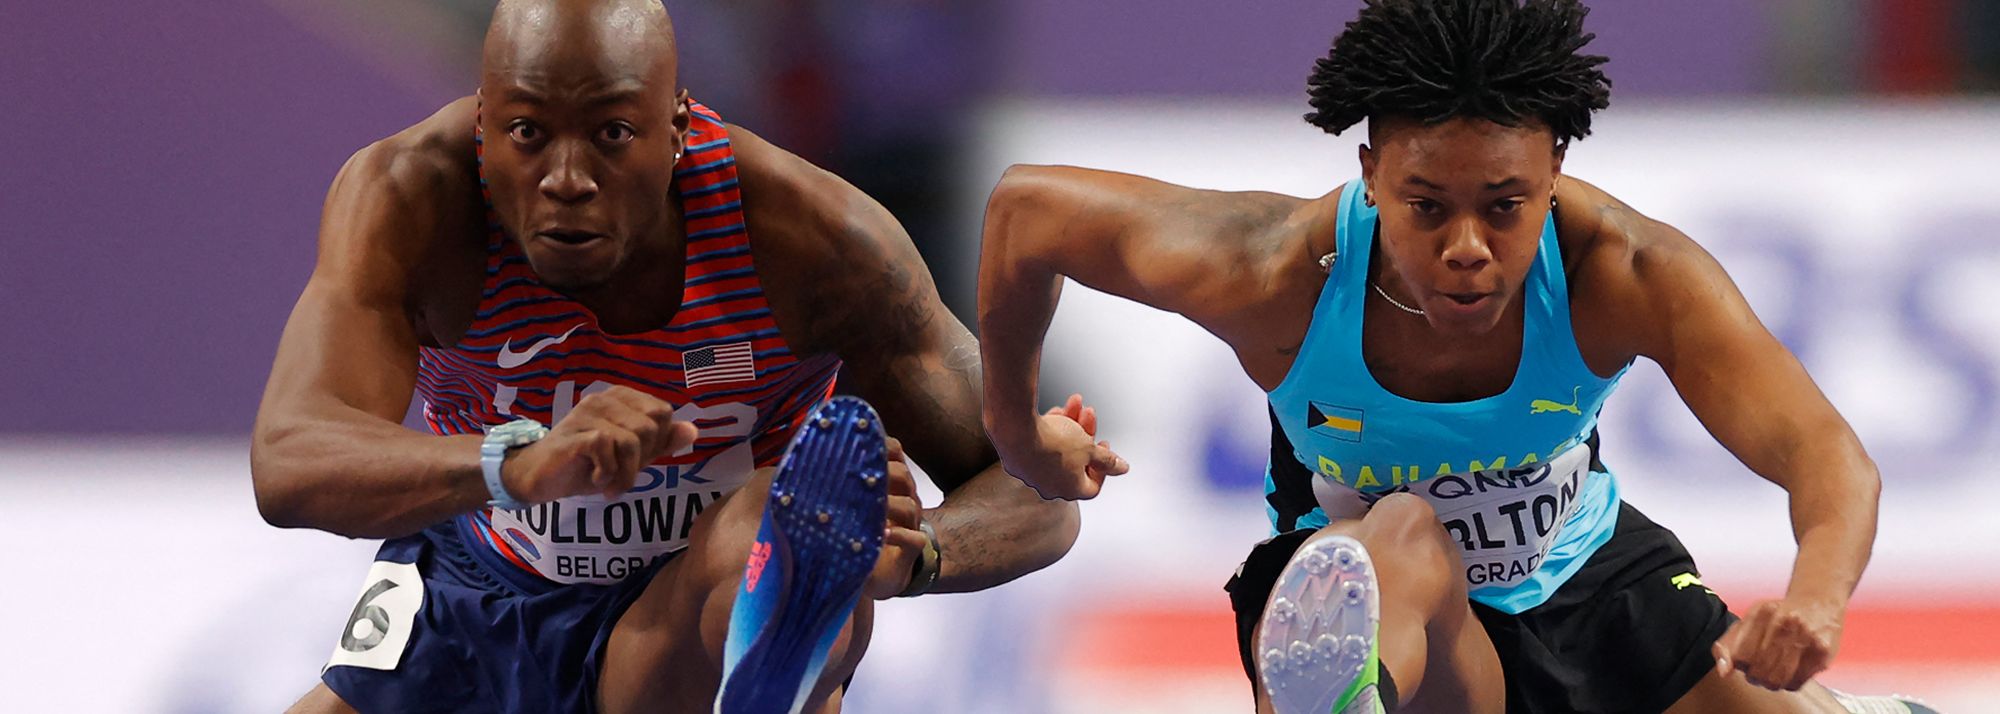 Expected highlights in the men's and women's 60m hurdles